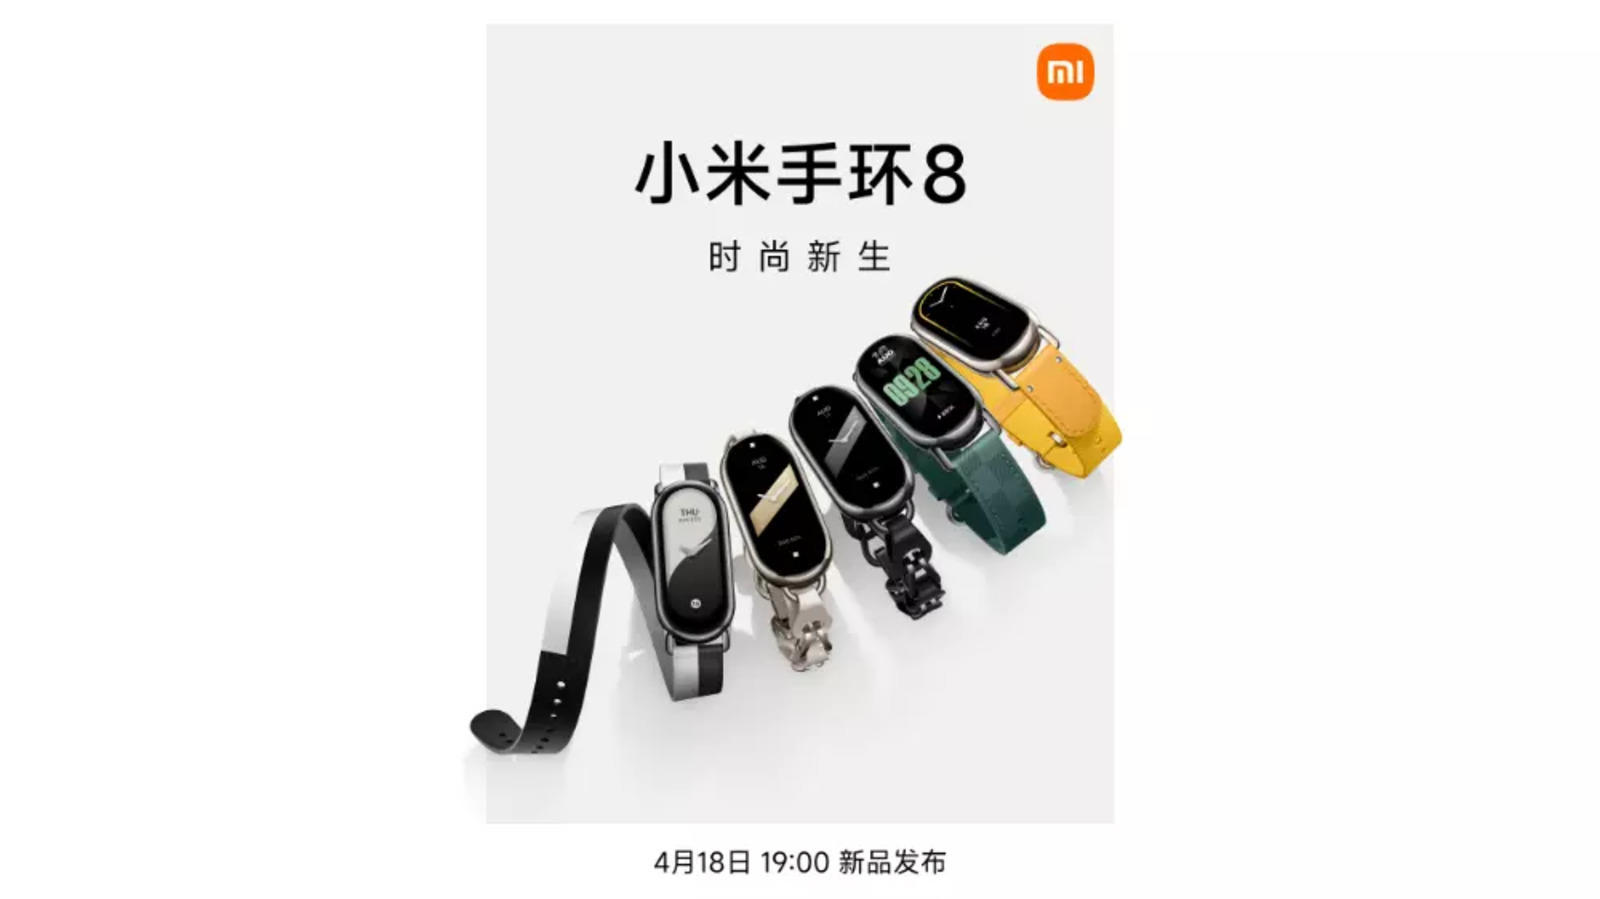 Mi Band 8 Price: Mi Band 8 launched. Check price, features